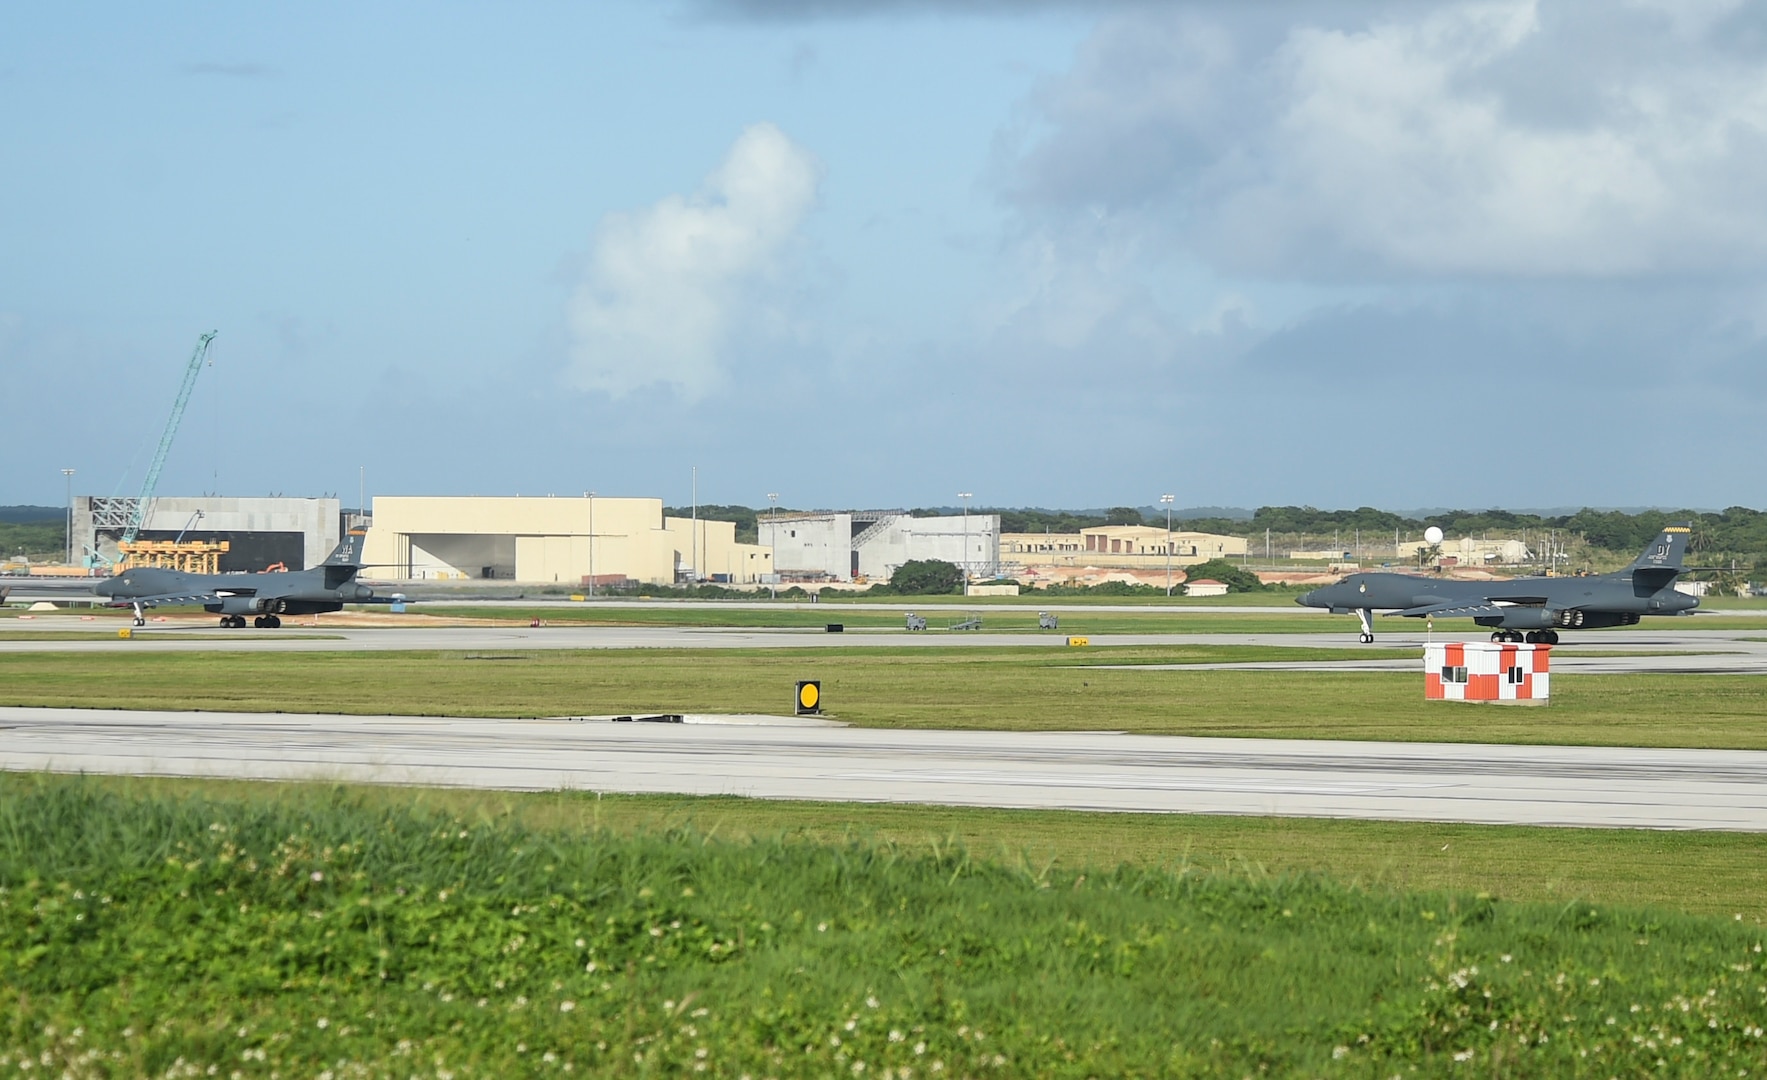 Two U.S. Air Force B-1B Lancers with the 9th Expeditionary Bomb Squadron taxi on a runway during a joint interoperability exercise at Andersen Air Force Base, Guam, Nov. 13, 2020. U.S. Air Force B-1B Lancers from the continental U.S. flew alongside the aircraft with the 9th EBS to demonstrate the bomber aircraft’s global reach and long-range strike capabilities as they trained in the Indo-Pacific region. (U.S. Air Force photo by Staff Sgt. David Owsianka)